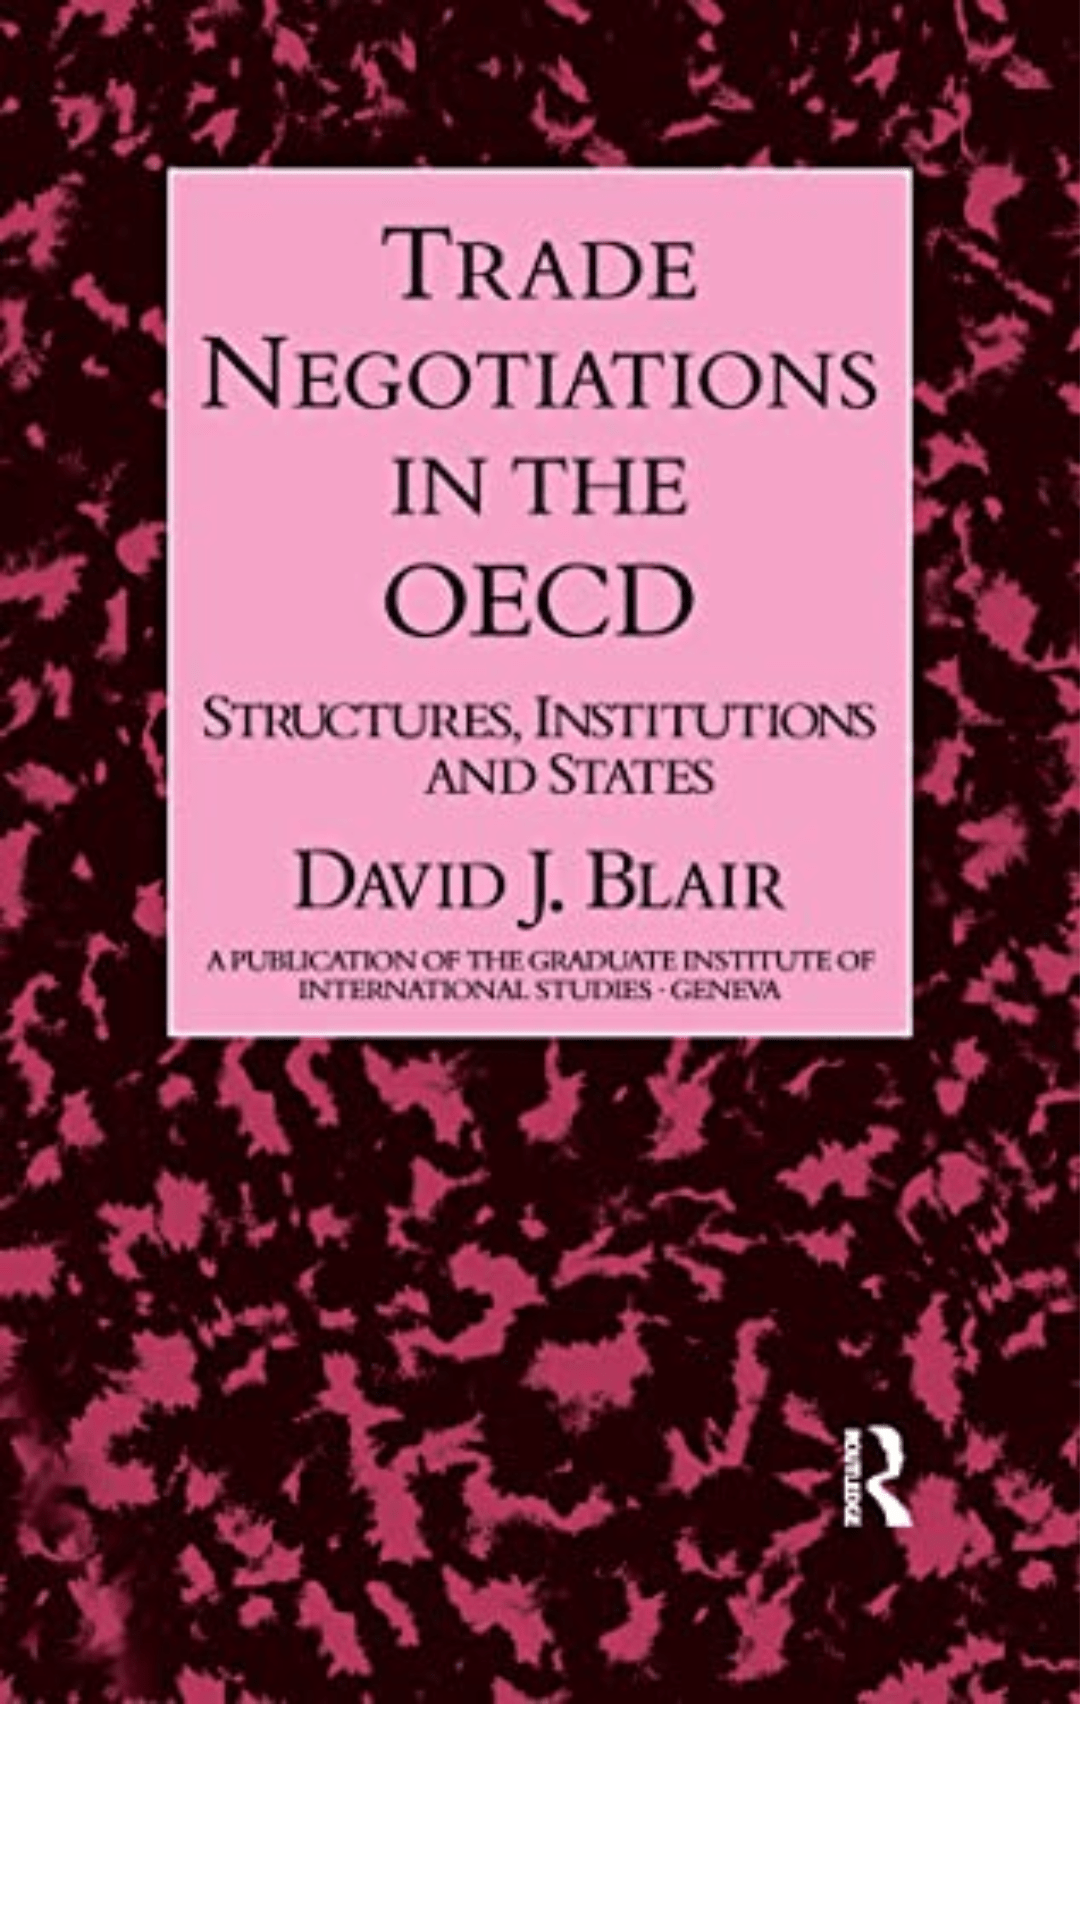 Trade Negotiations in the OECD